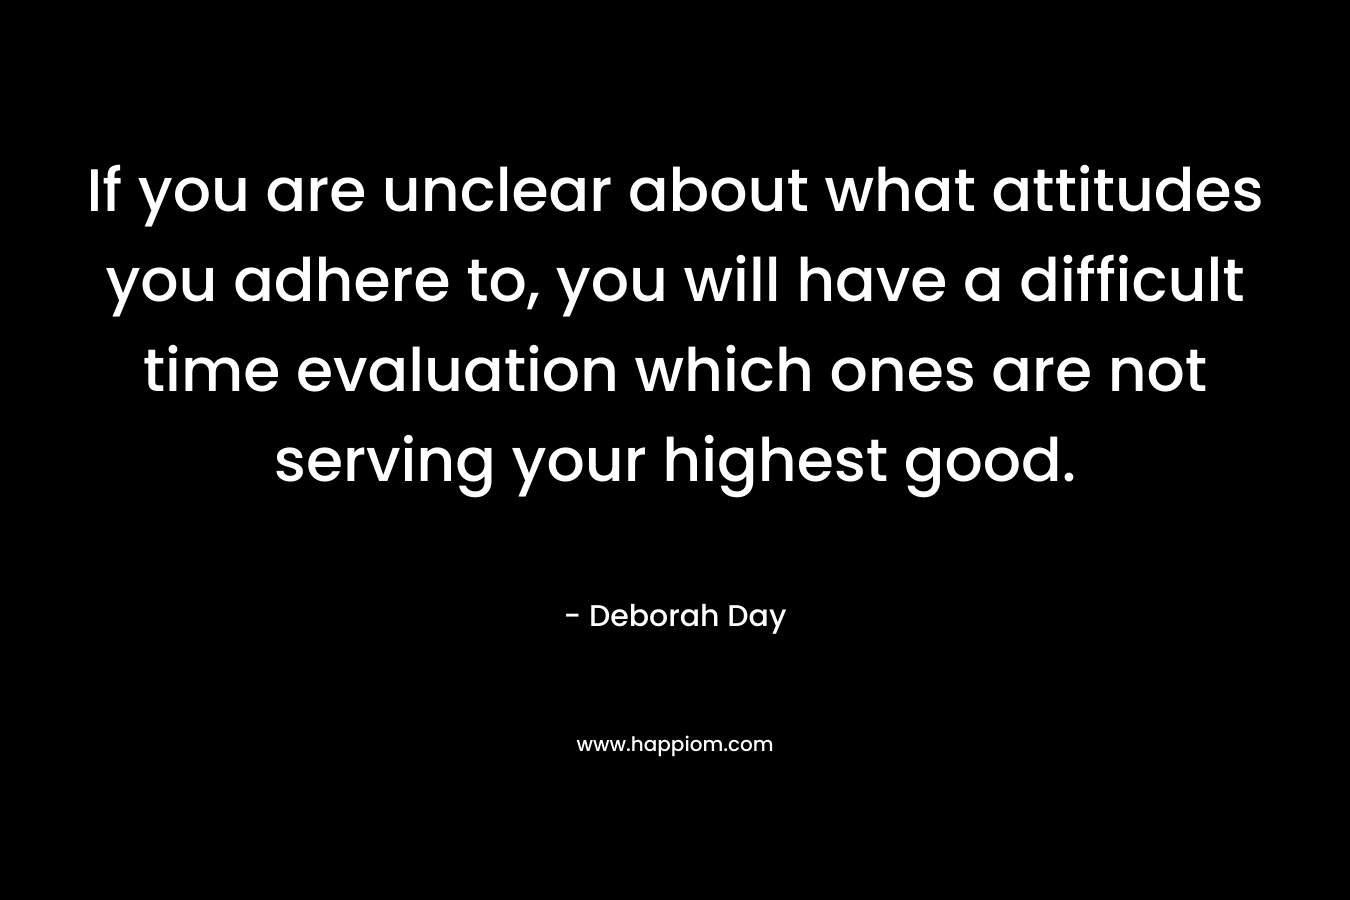 If you are unclear about what attitudes you adhere to, you will have a difficult time evaluation which ones are not serving your highest good. – Deborah Day